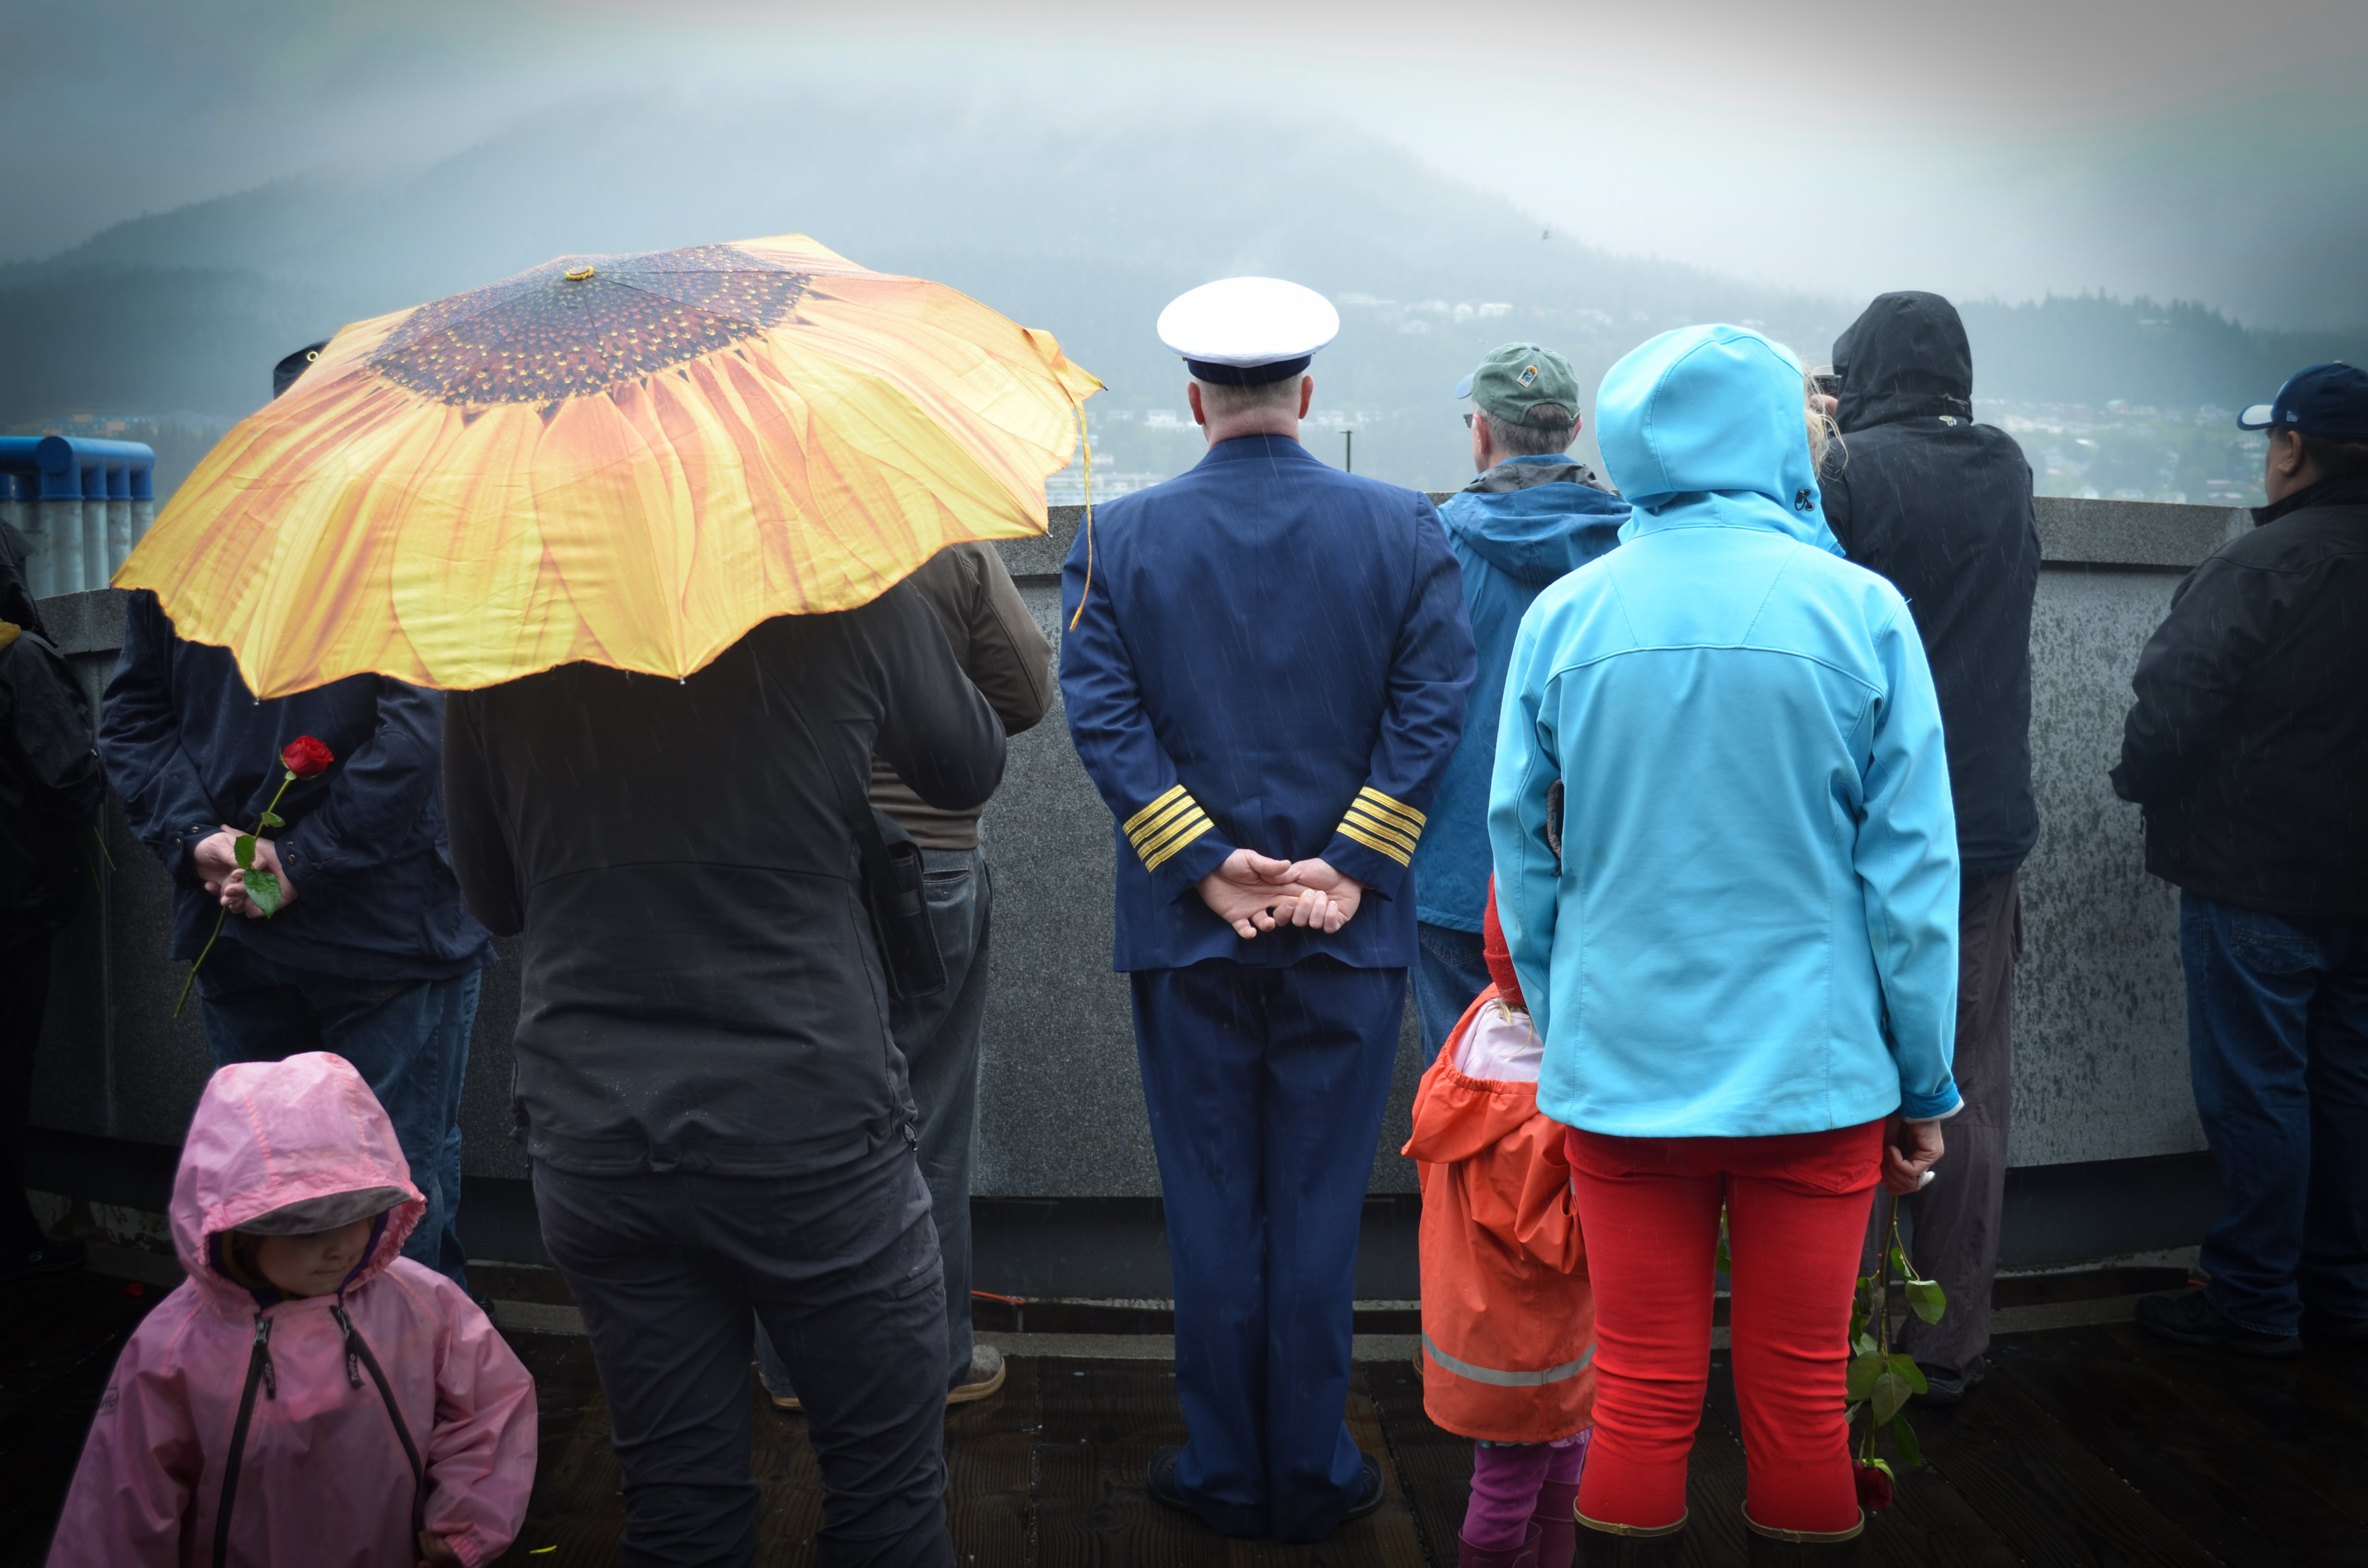 More than a hundred people gathered May 7, 2016 for the Blessing of the Fleet in Juneau. (Photo by Jennifer Canfield, KTOO - Juneau)